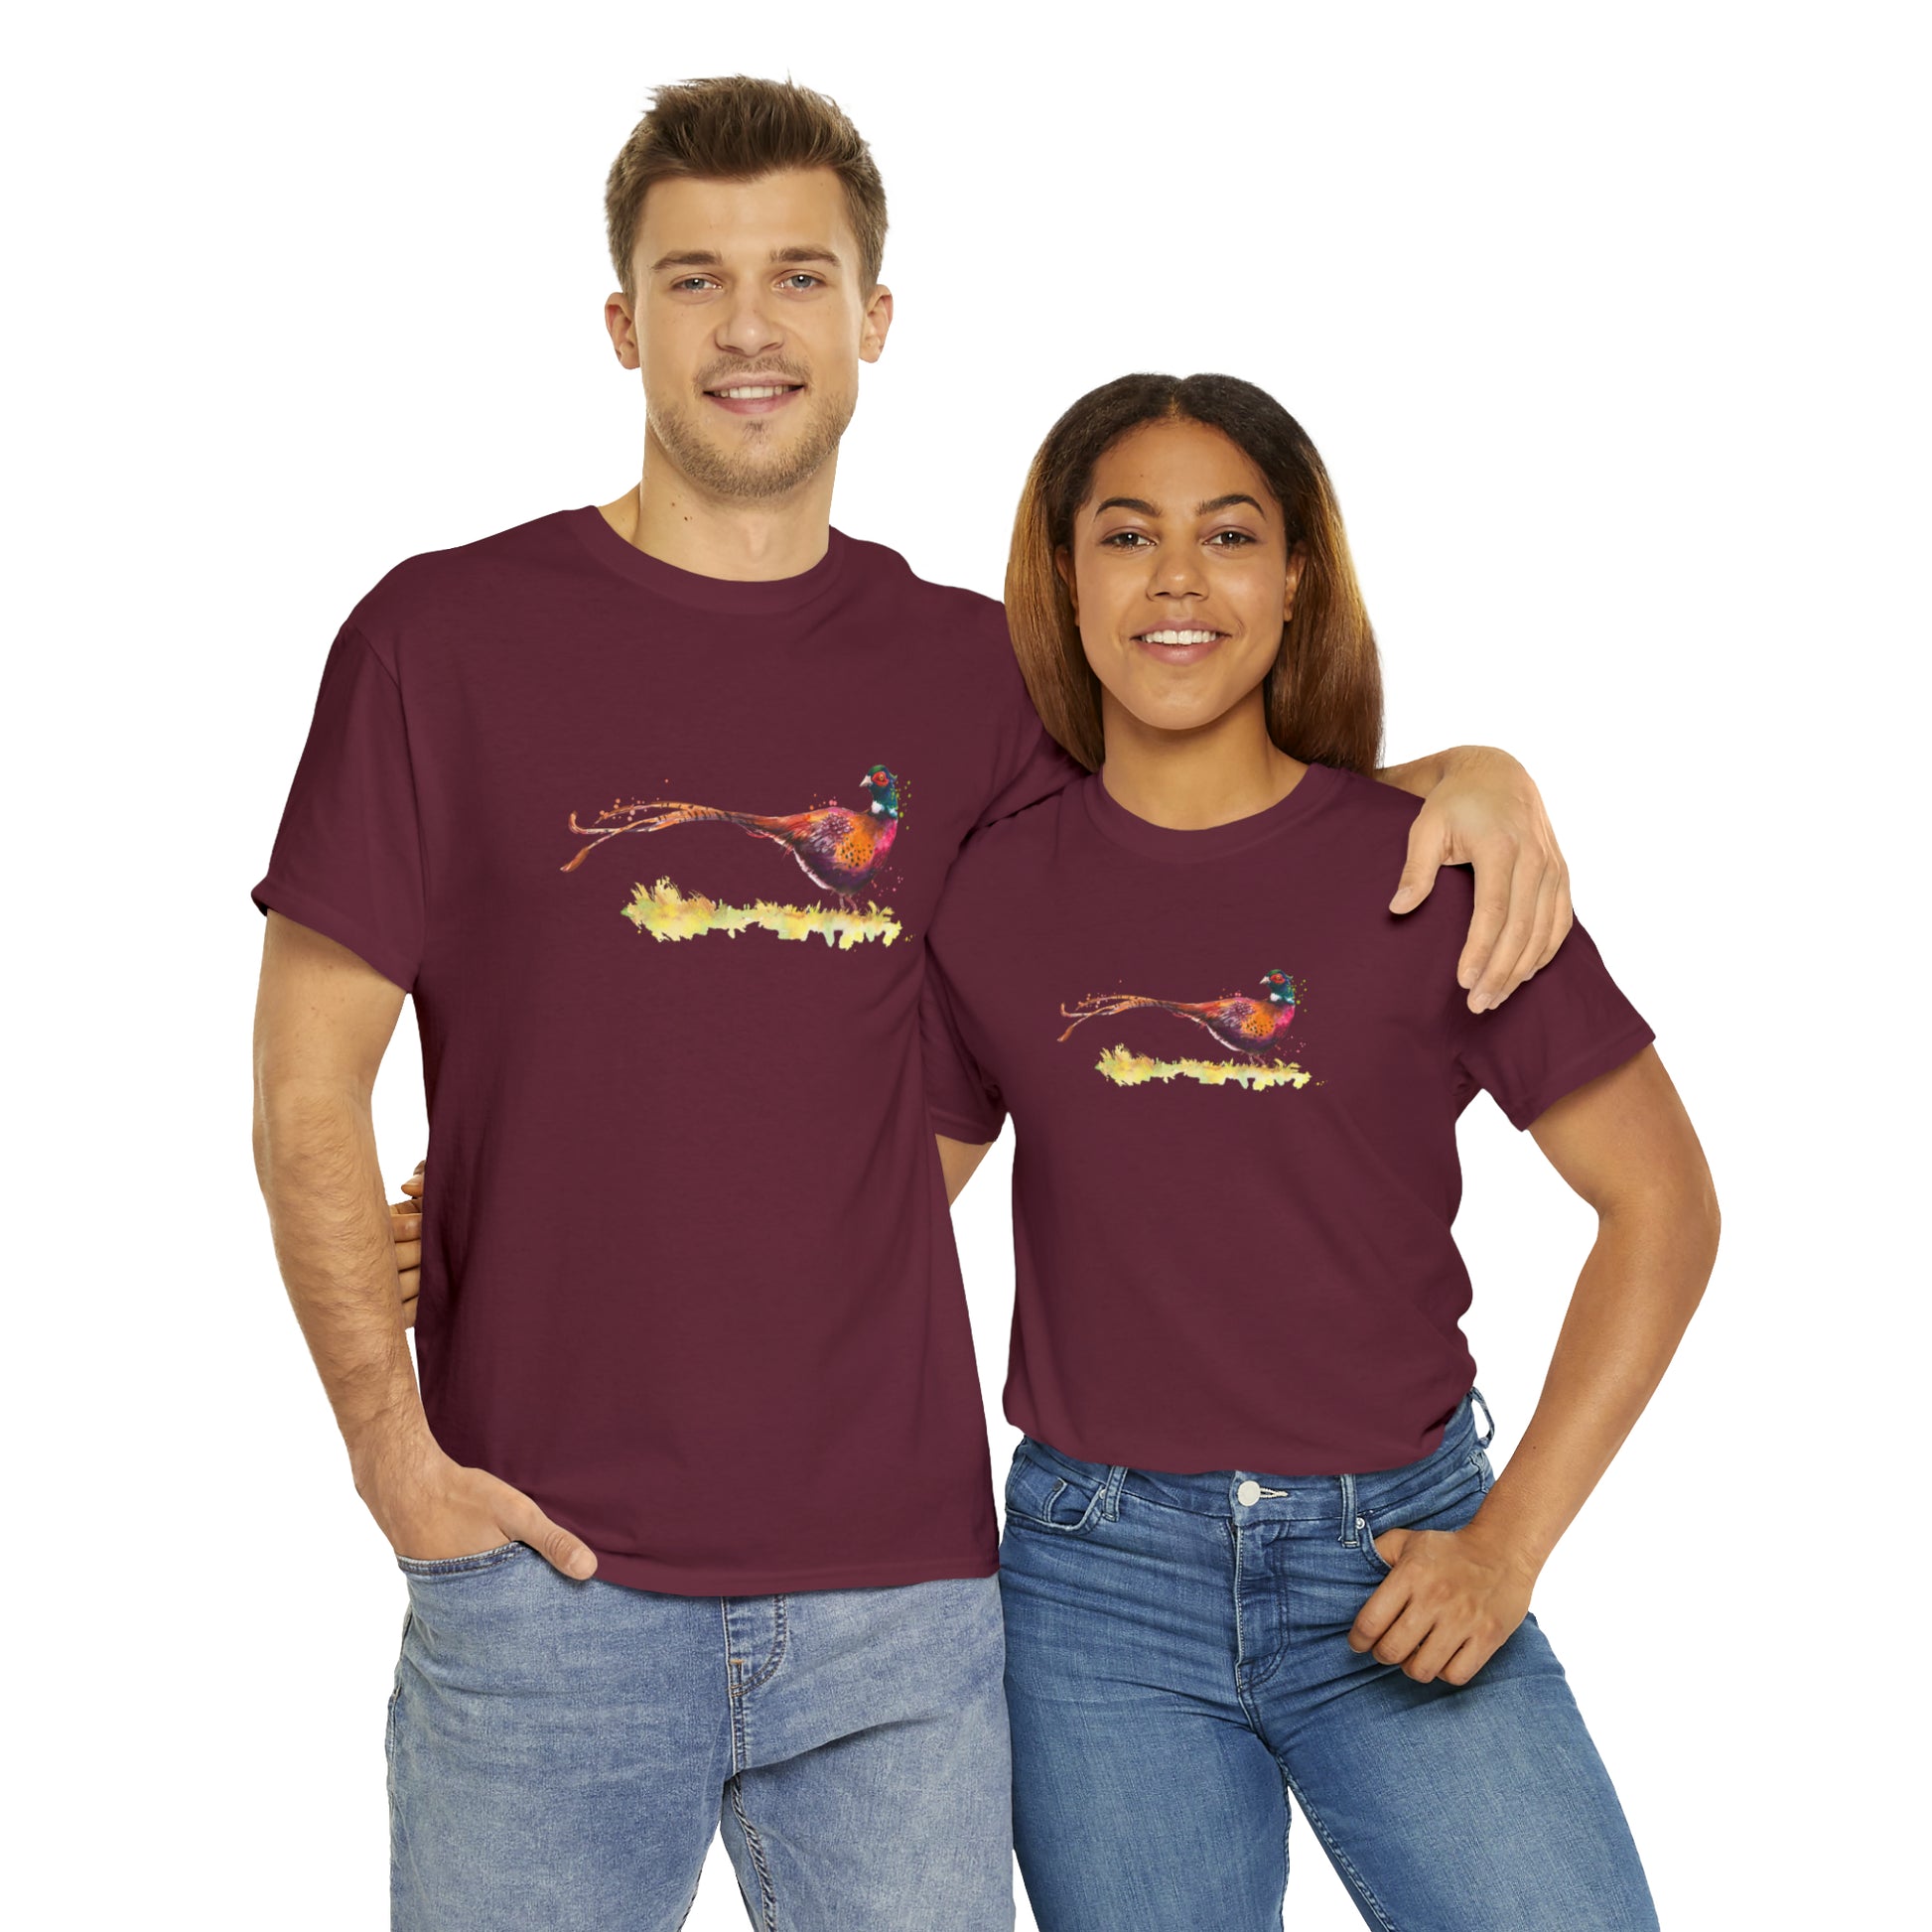 Mock up of a man and a woman wearing the Maroon shirt